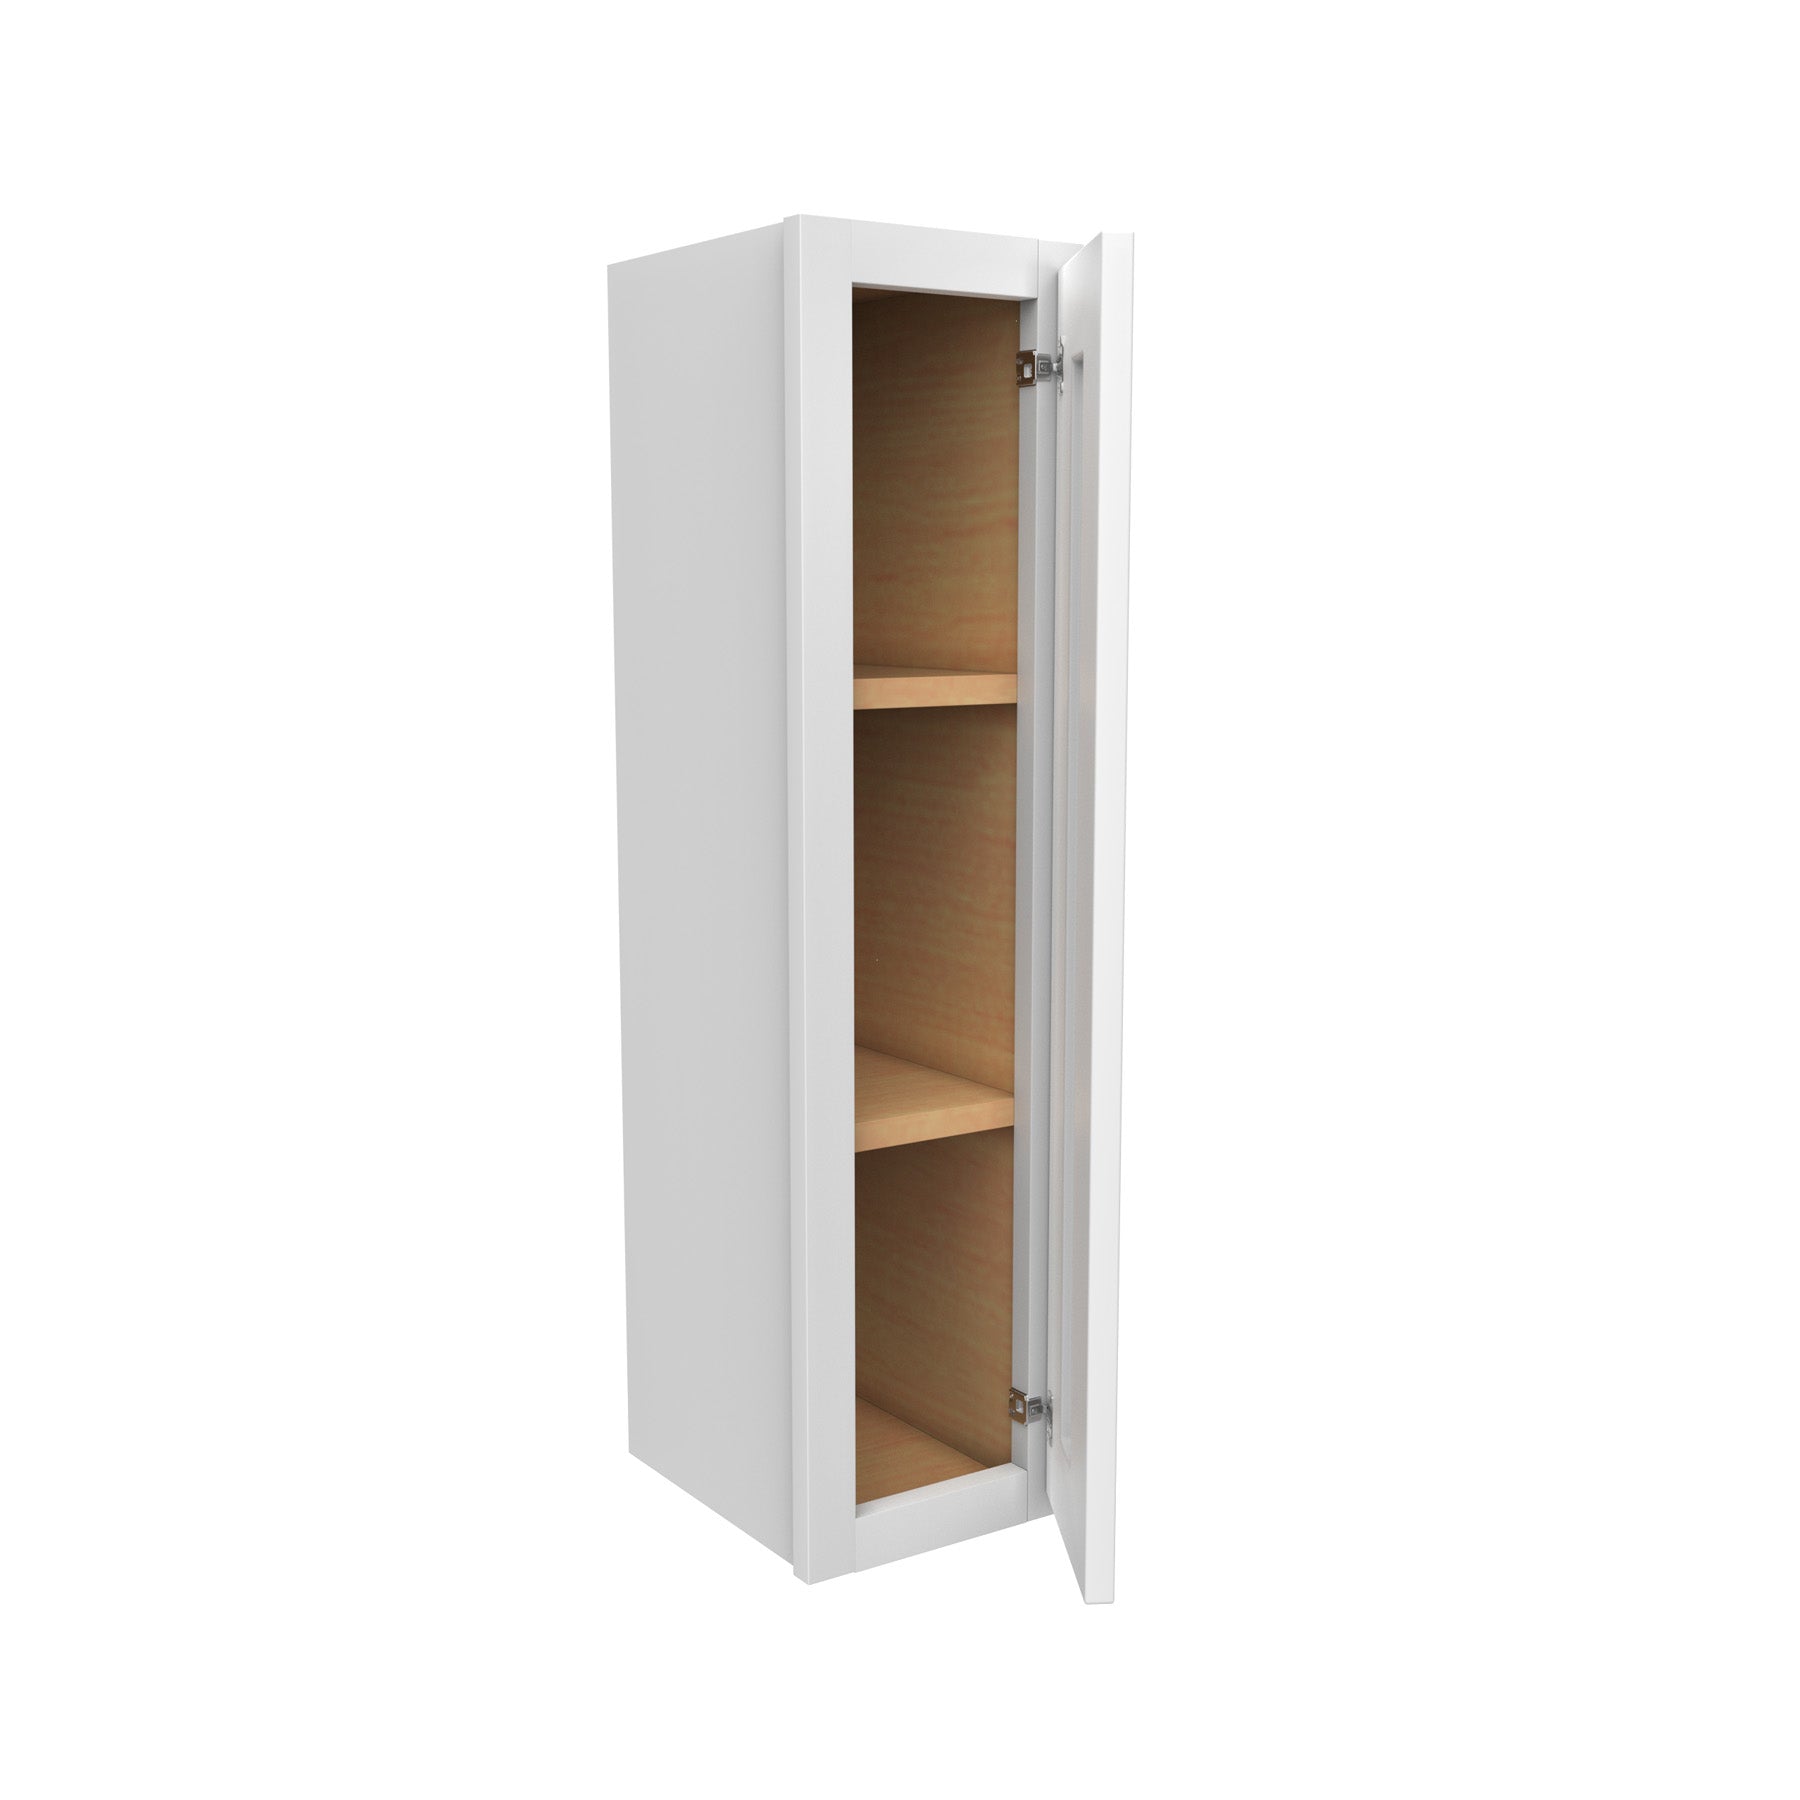 36 Inch High Single Door Wall Cabinet - Luxor White Shaker - Ready To Assemble, 9"W x 36"H x 12"D